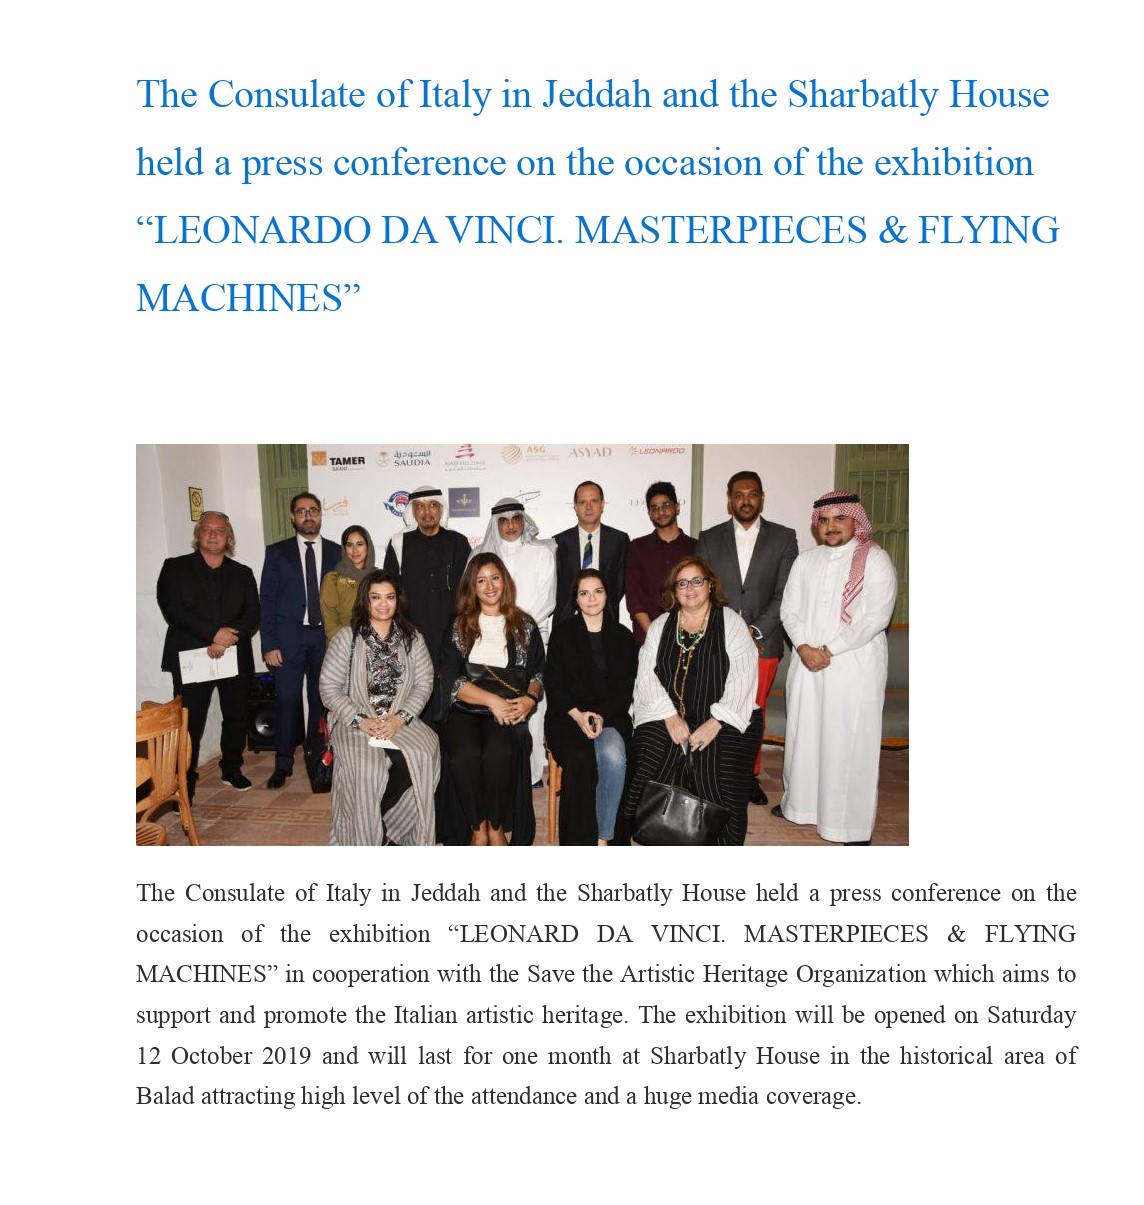 The Consulate of Italy in Jeddah and the Sharbatly House held a press conference on the occasion of the exhibition “LEONARDO DA VINCI. MASTERPIECES & FLYING MACHINES”